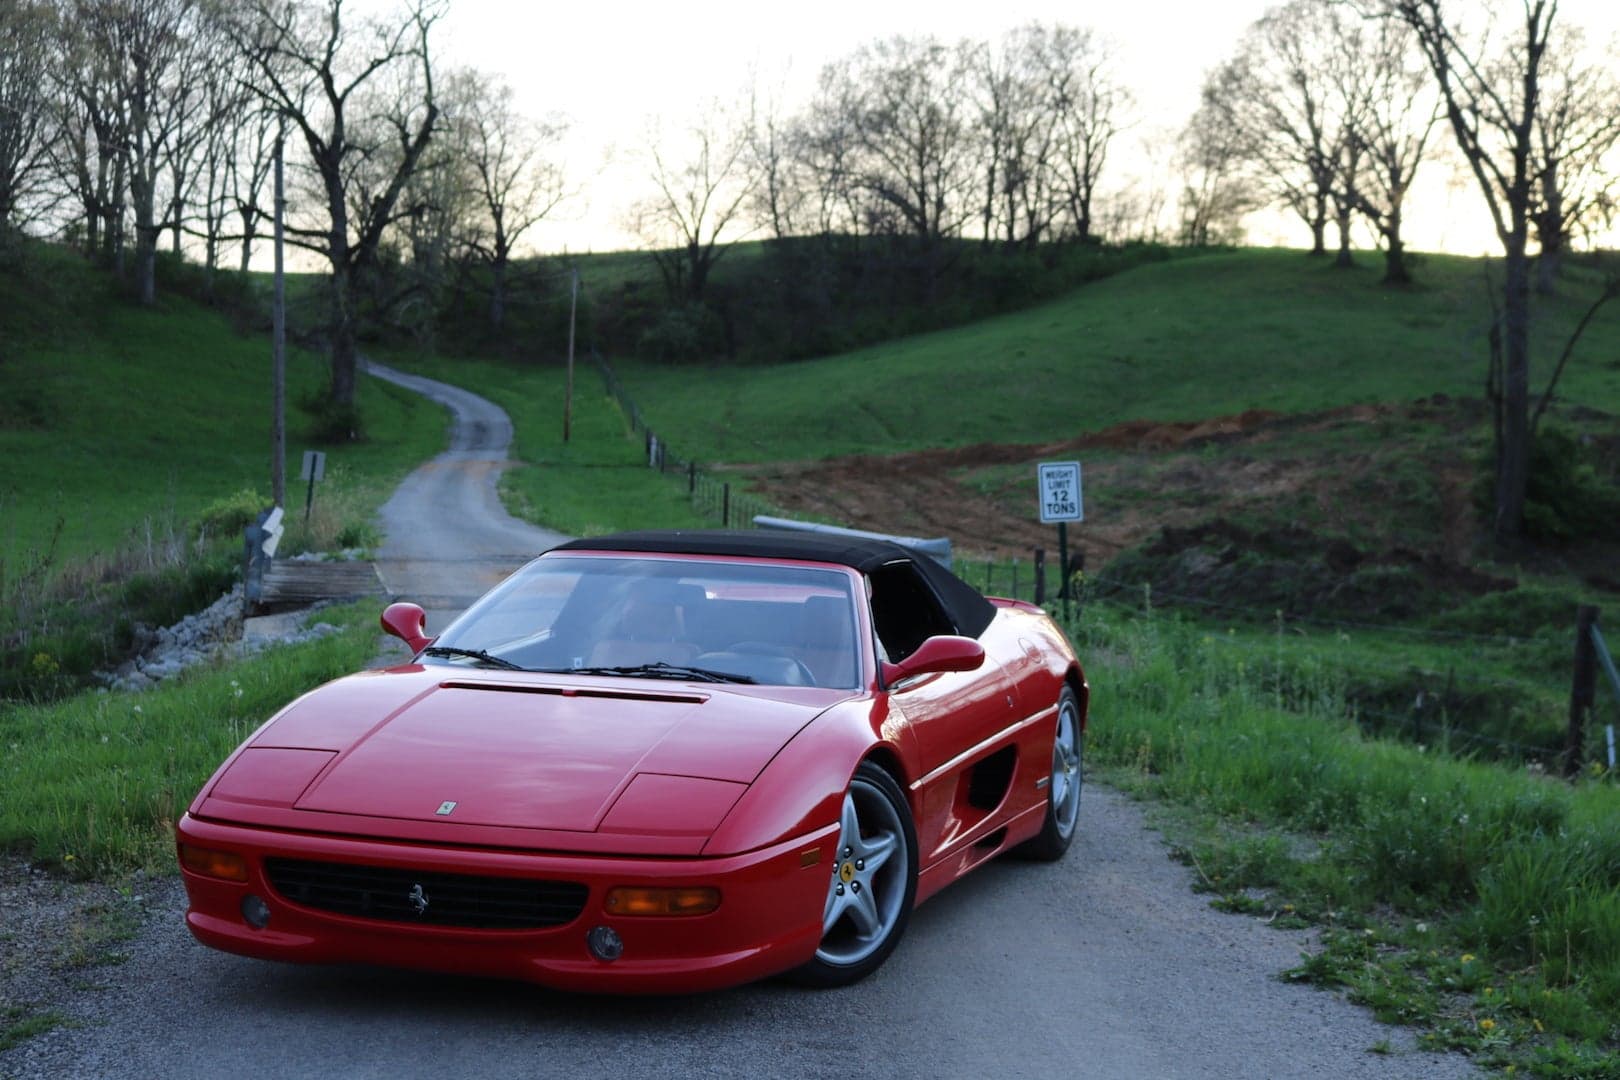 This Ferrari F355 Spider on Bring a Trailer Is a Time Machine to the ’90s